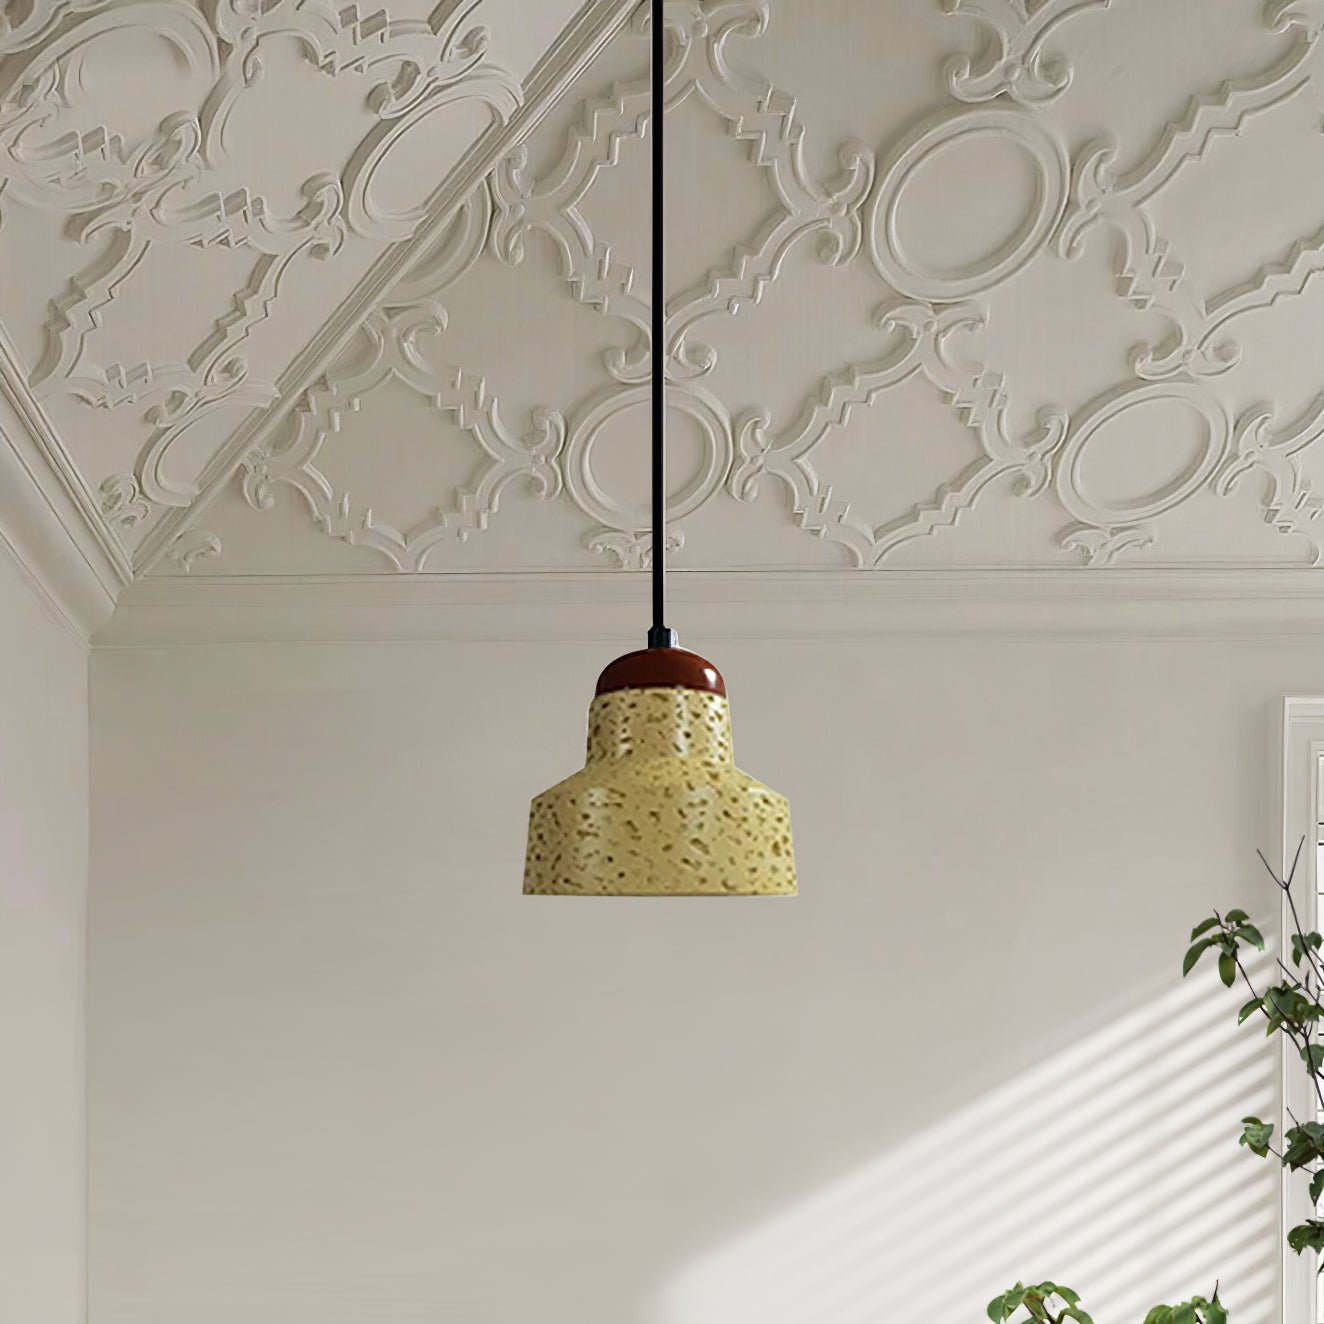 Cement Pendant Light - Dimensions: Diameter 5.3 inches x Height 6.9 inches (13.5cm x 17.5cm)